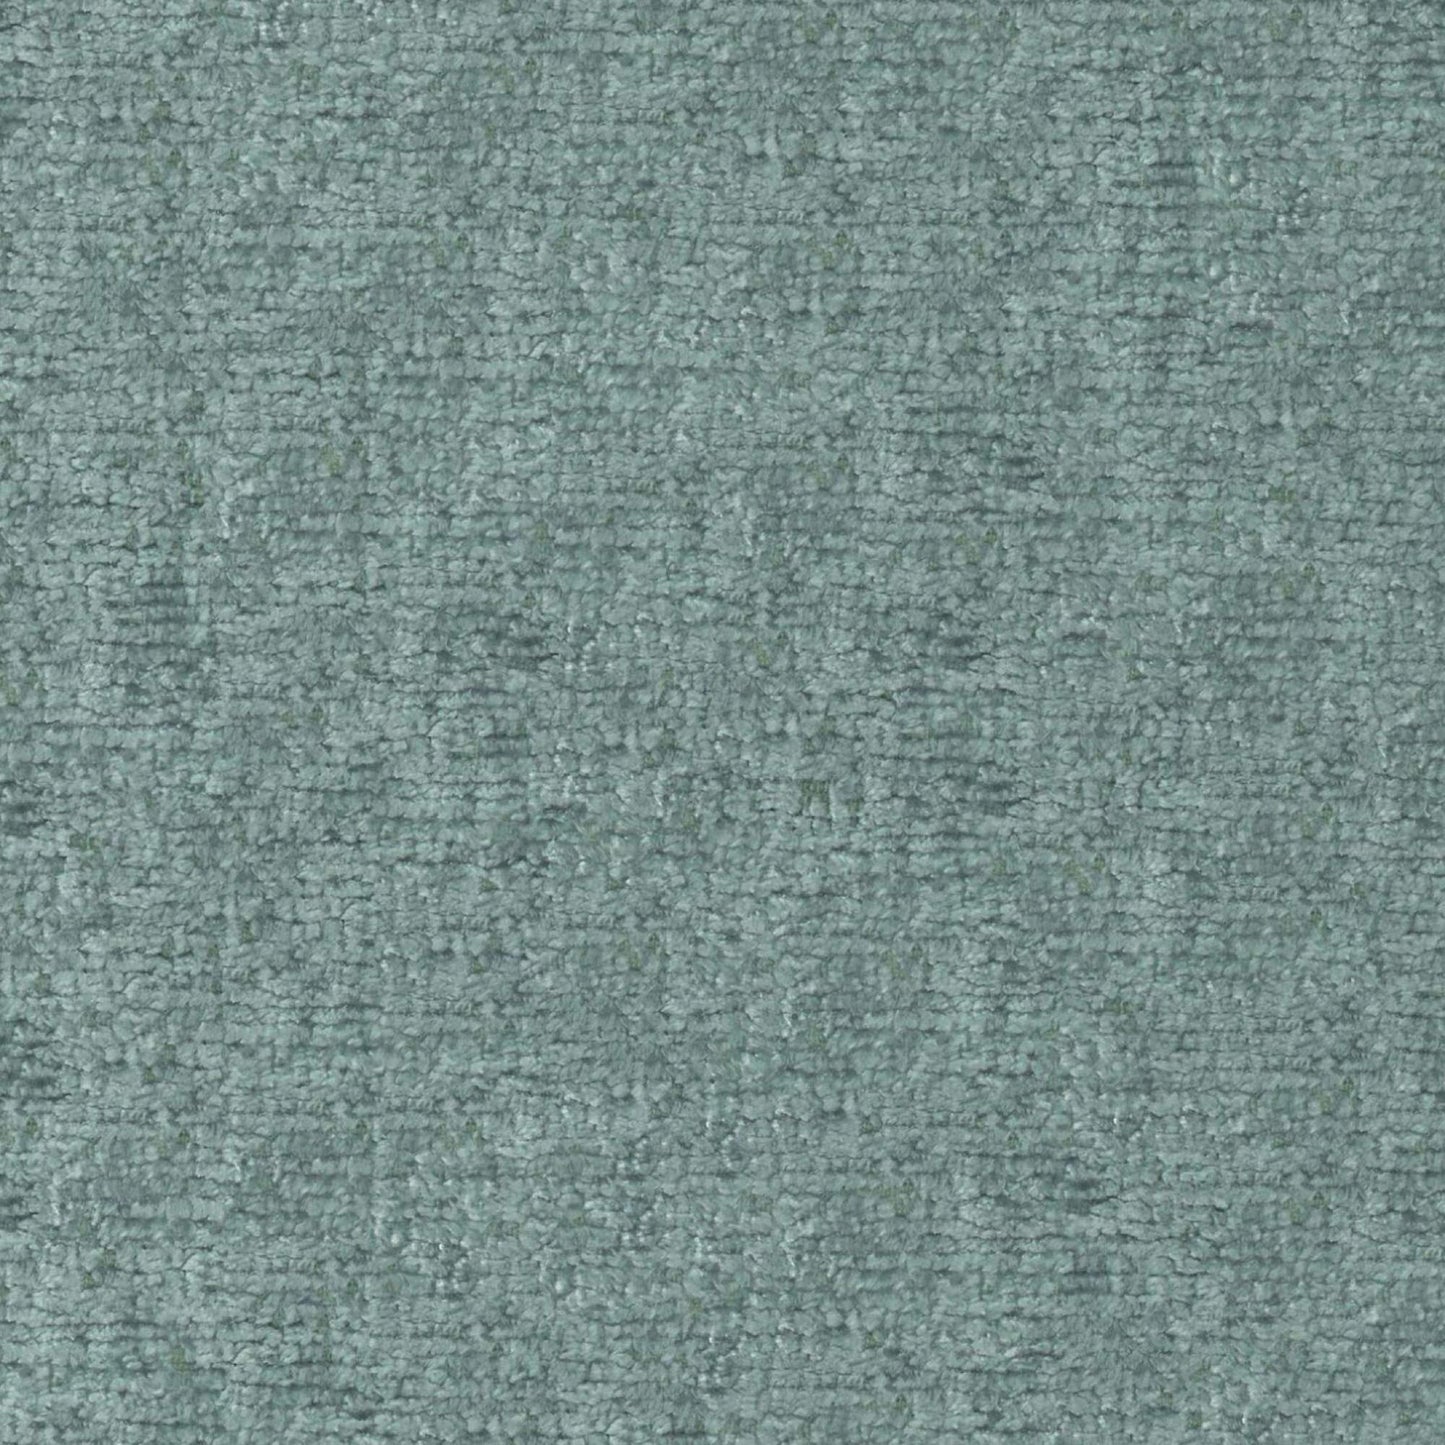 MONSIEUR MINERAL LUXURY CHENILLE FABRIC SAMPLE | SPECIAL COLLECTION | # 2